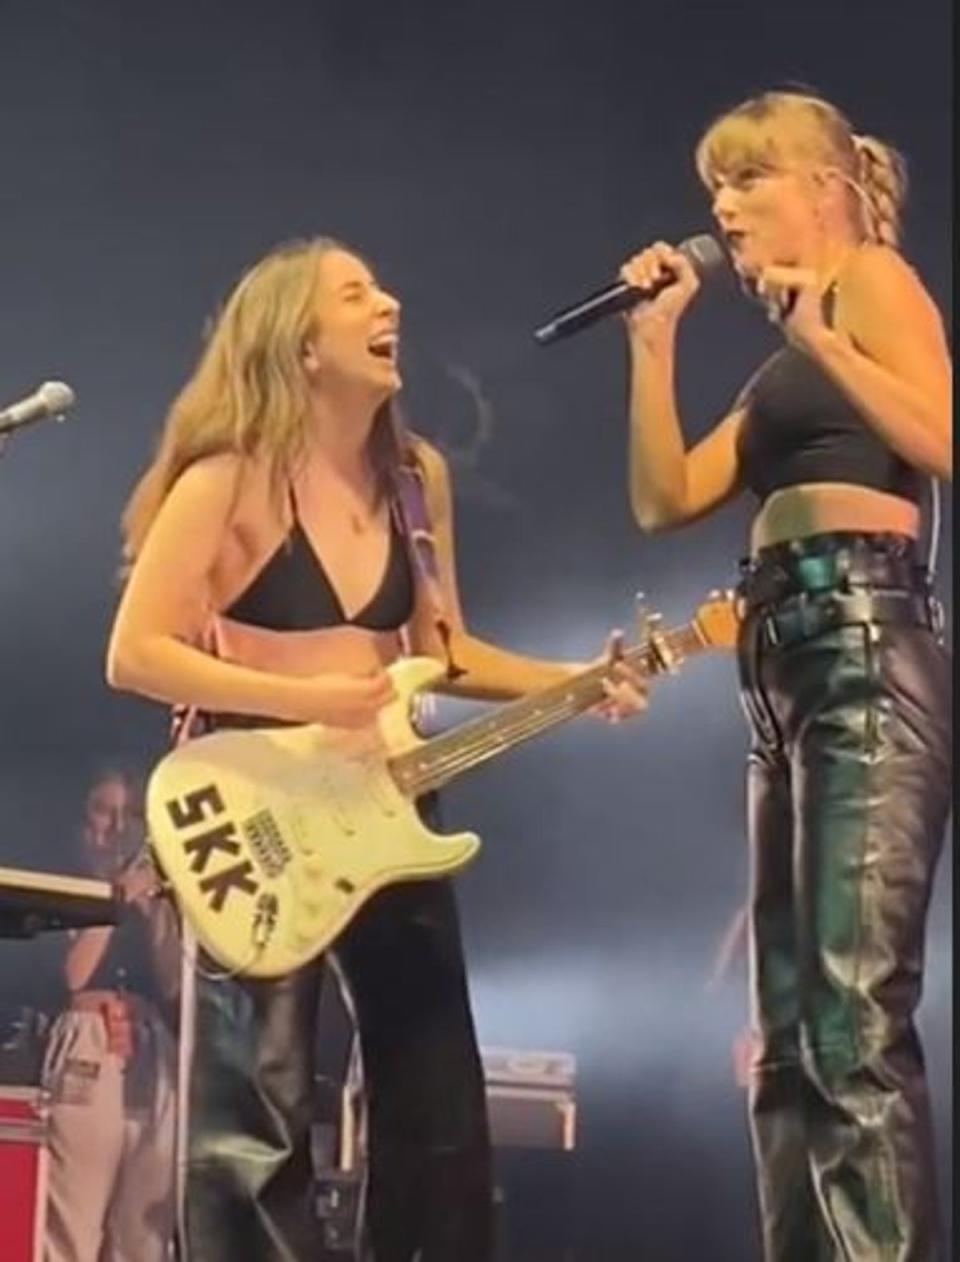 Taylor Swift joined her friends and collaborators Haim onstage at the O2 (TikTok)